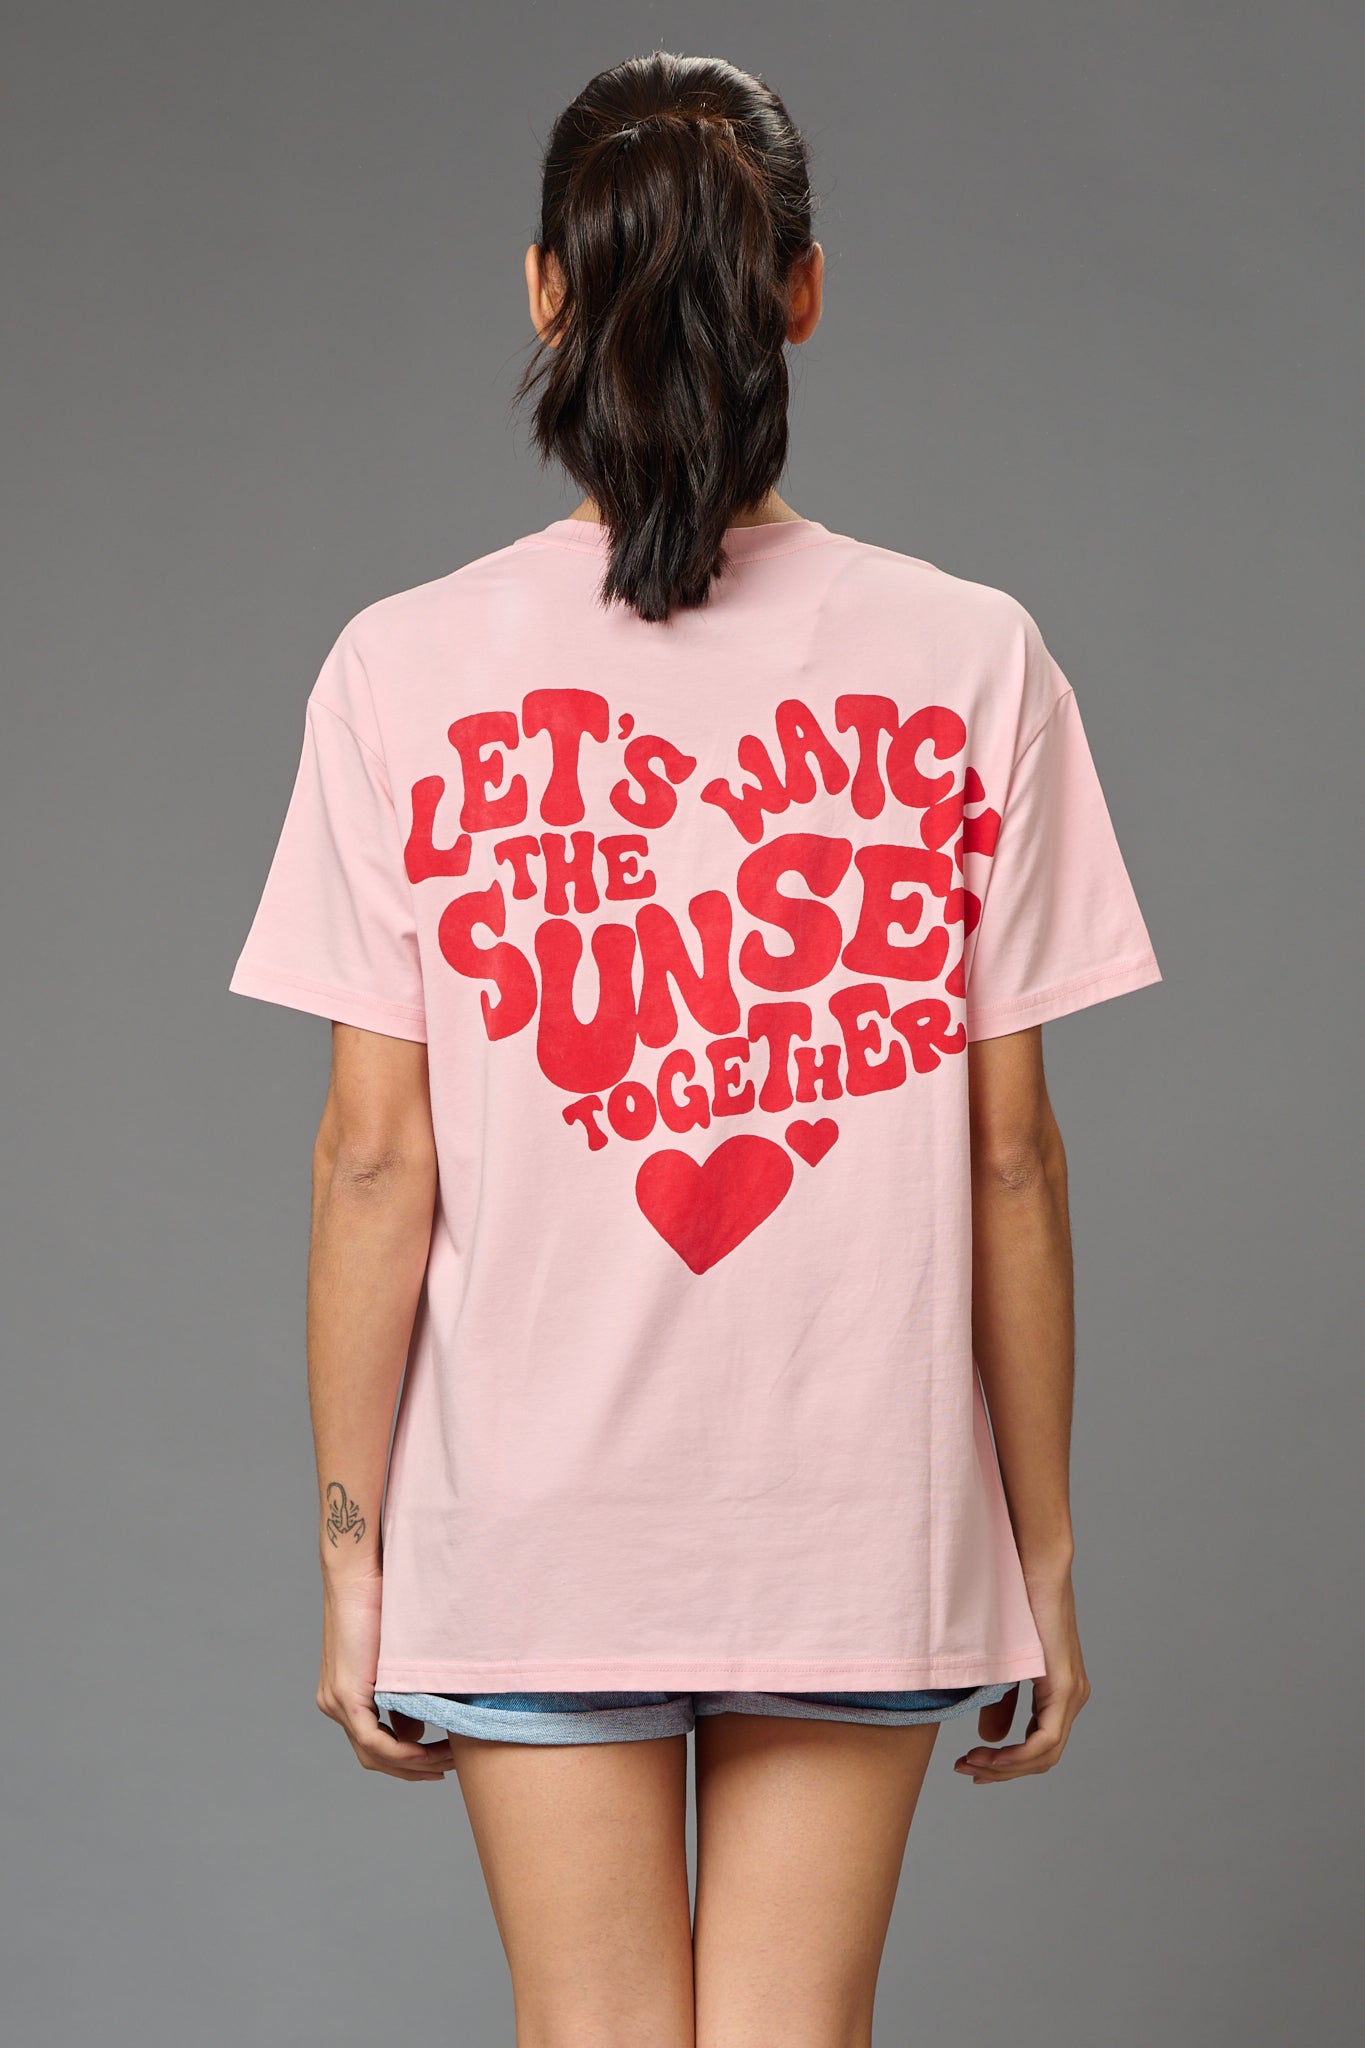 Let's Watch the Sunset Together Printed Baby Pink Oversized T-Shirt for Women - Go Devil